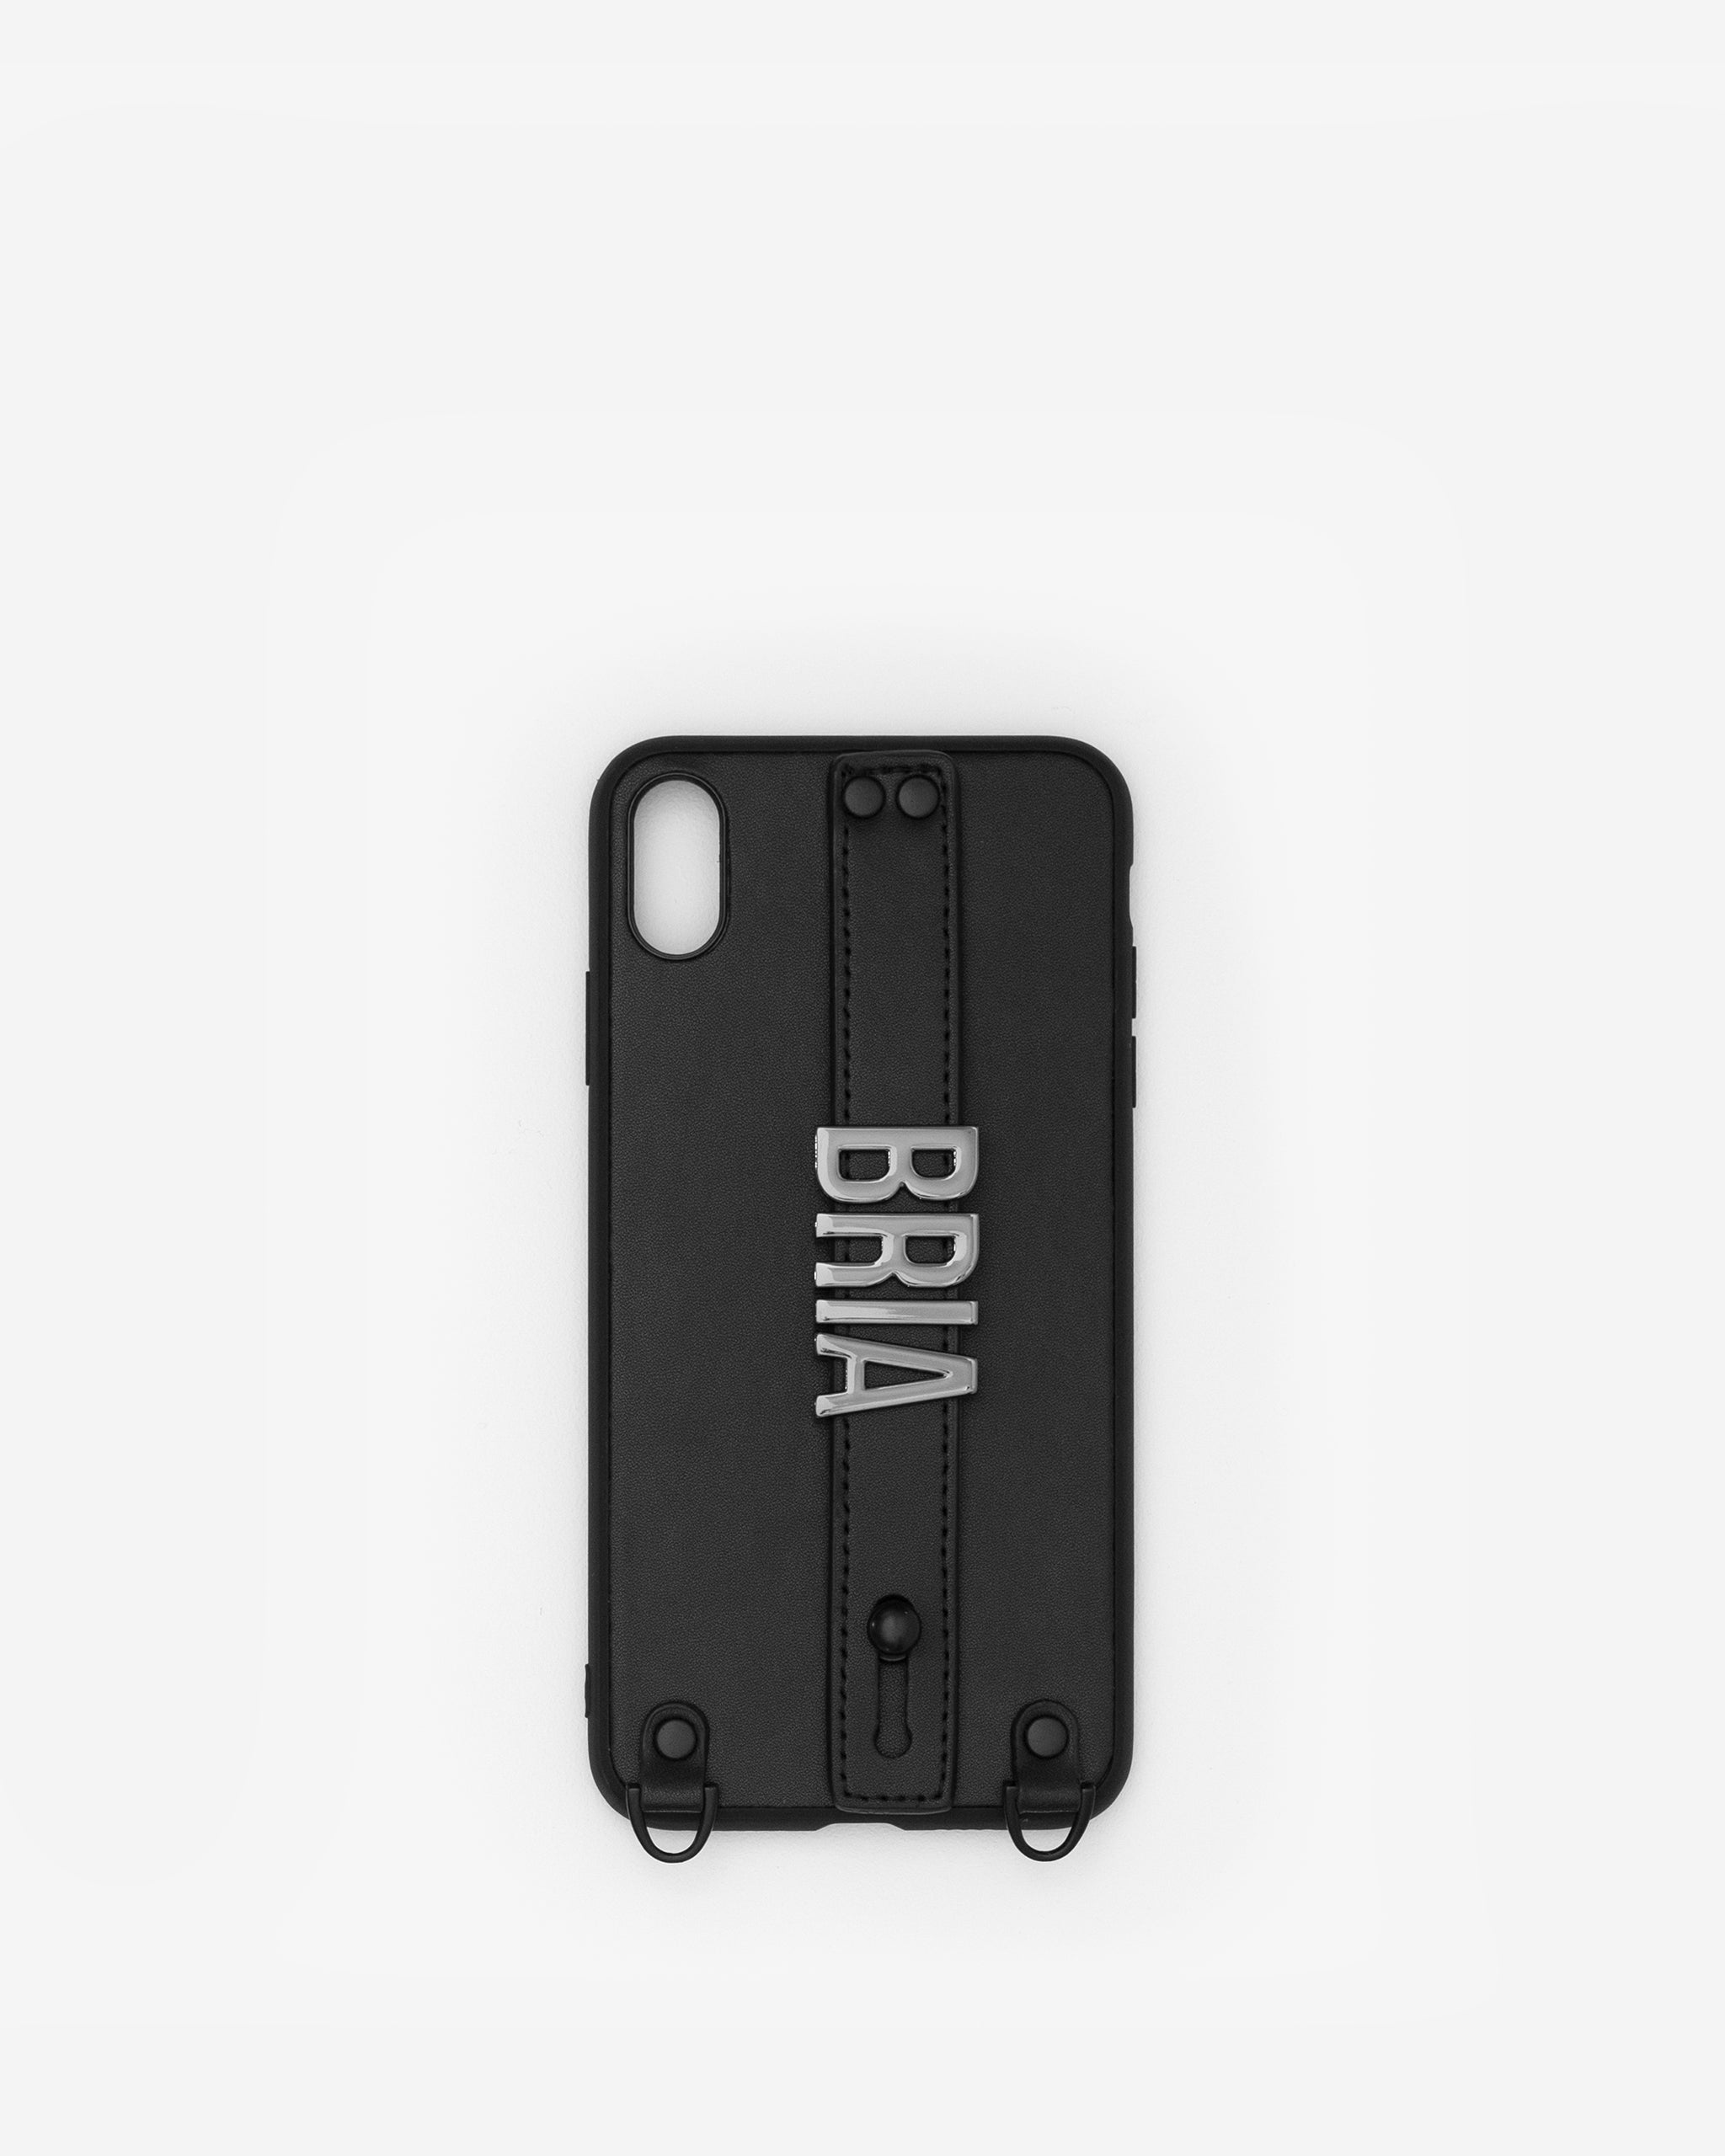 iPhone XS Max Case in Black/Gunmetal with Personalised Hardware